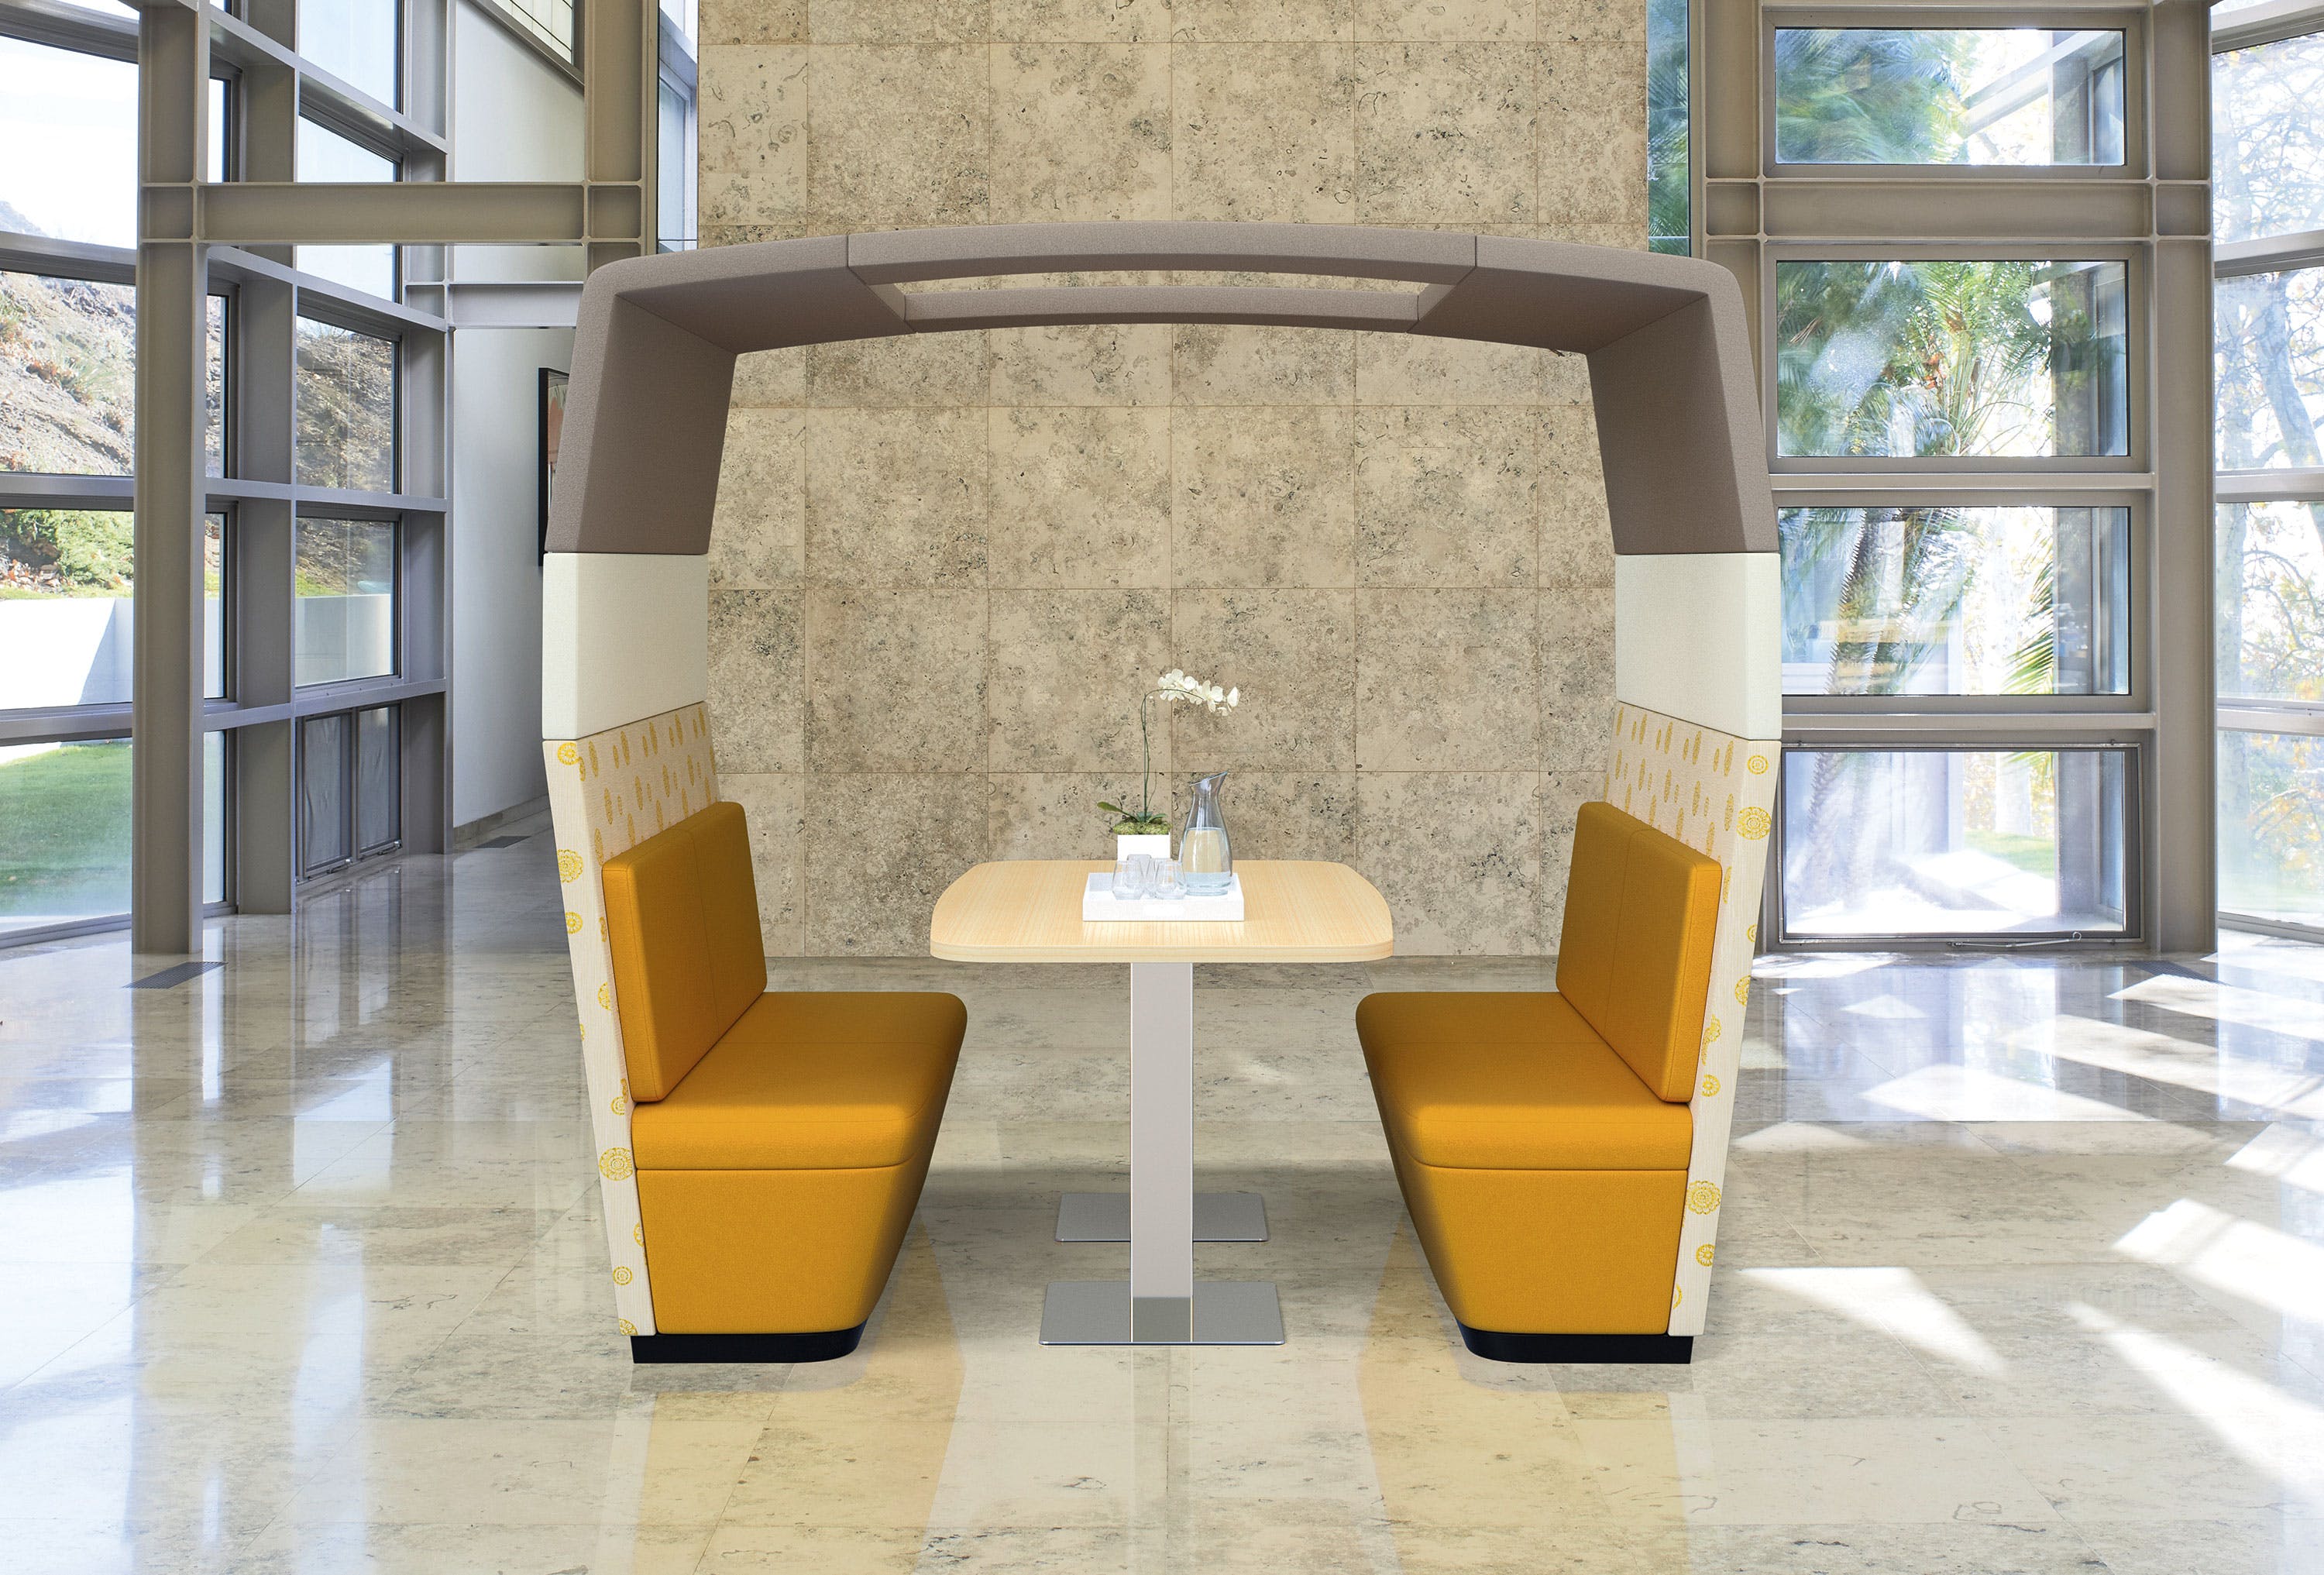 Co-op-Love-Seat-Booth--Open-Canopy--27-Inch-Meeting-Table.1519948729.2242